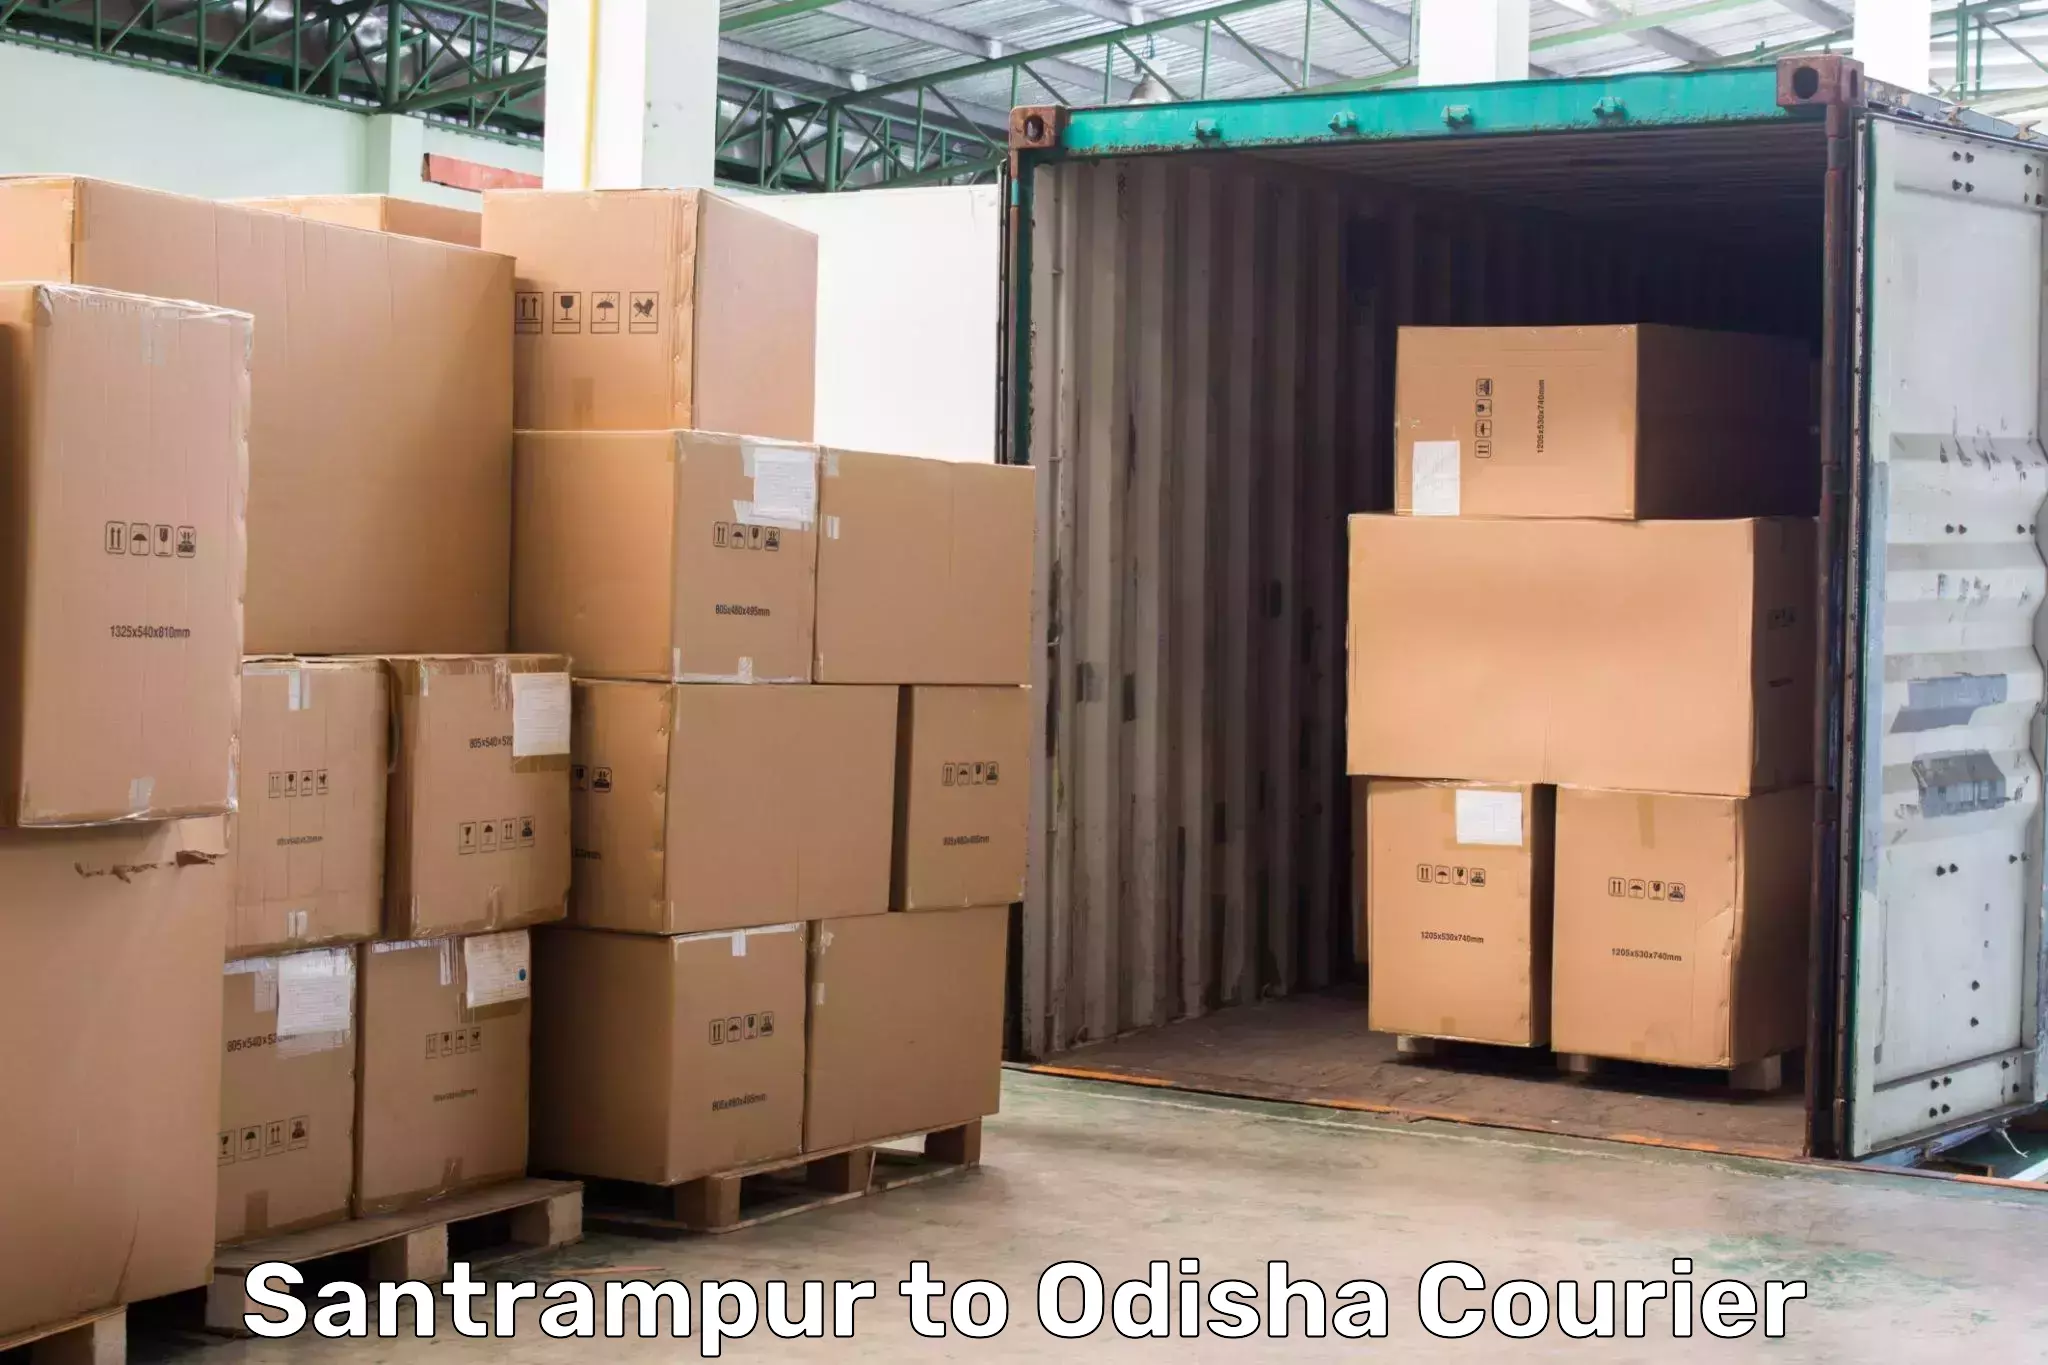 Reliable parcel services in Santrampur to Balipokhari